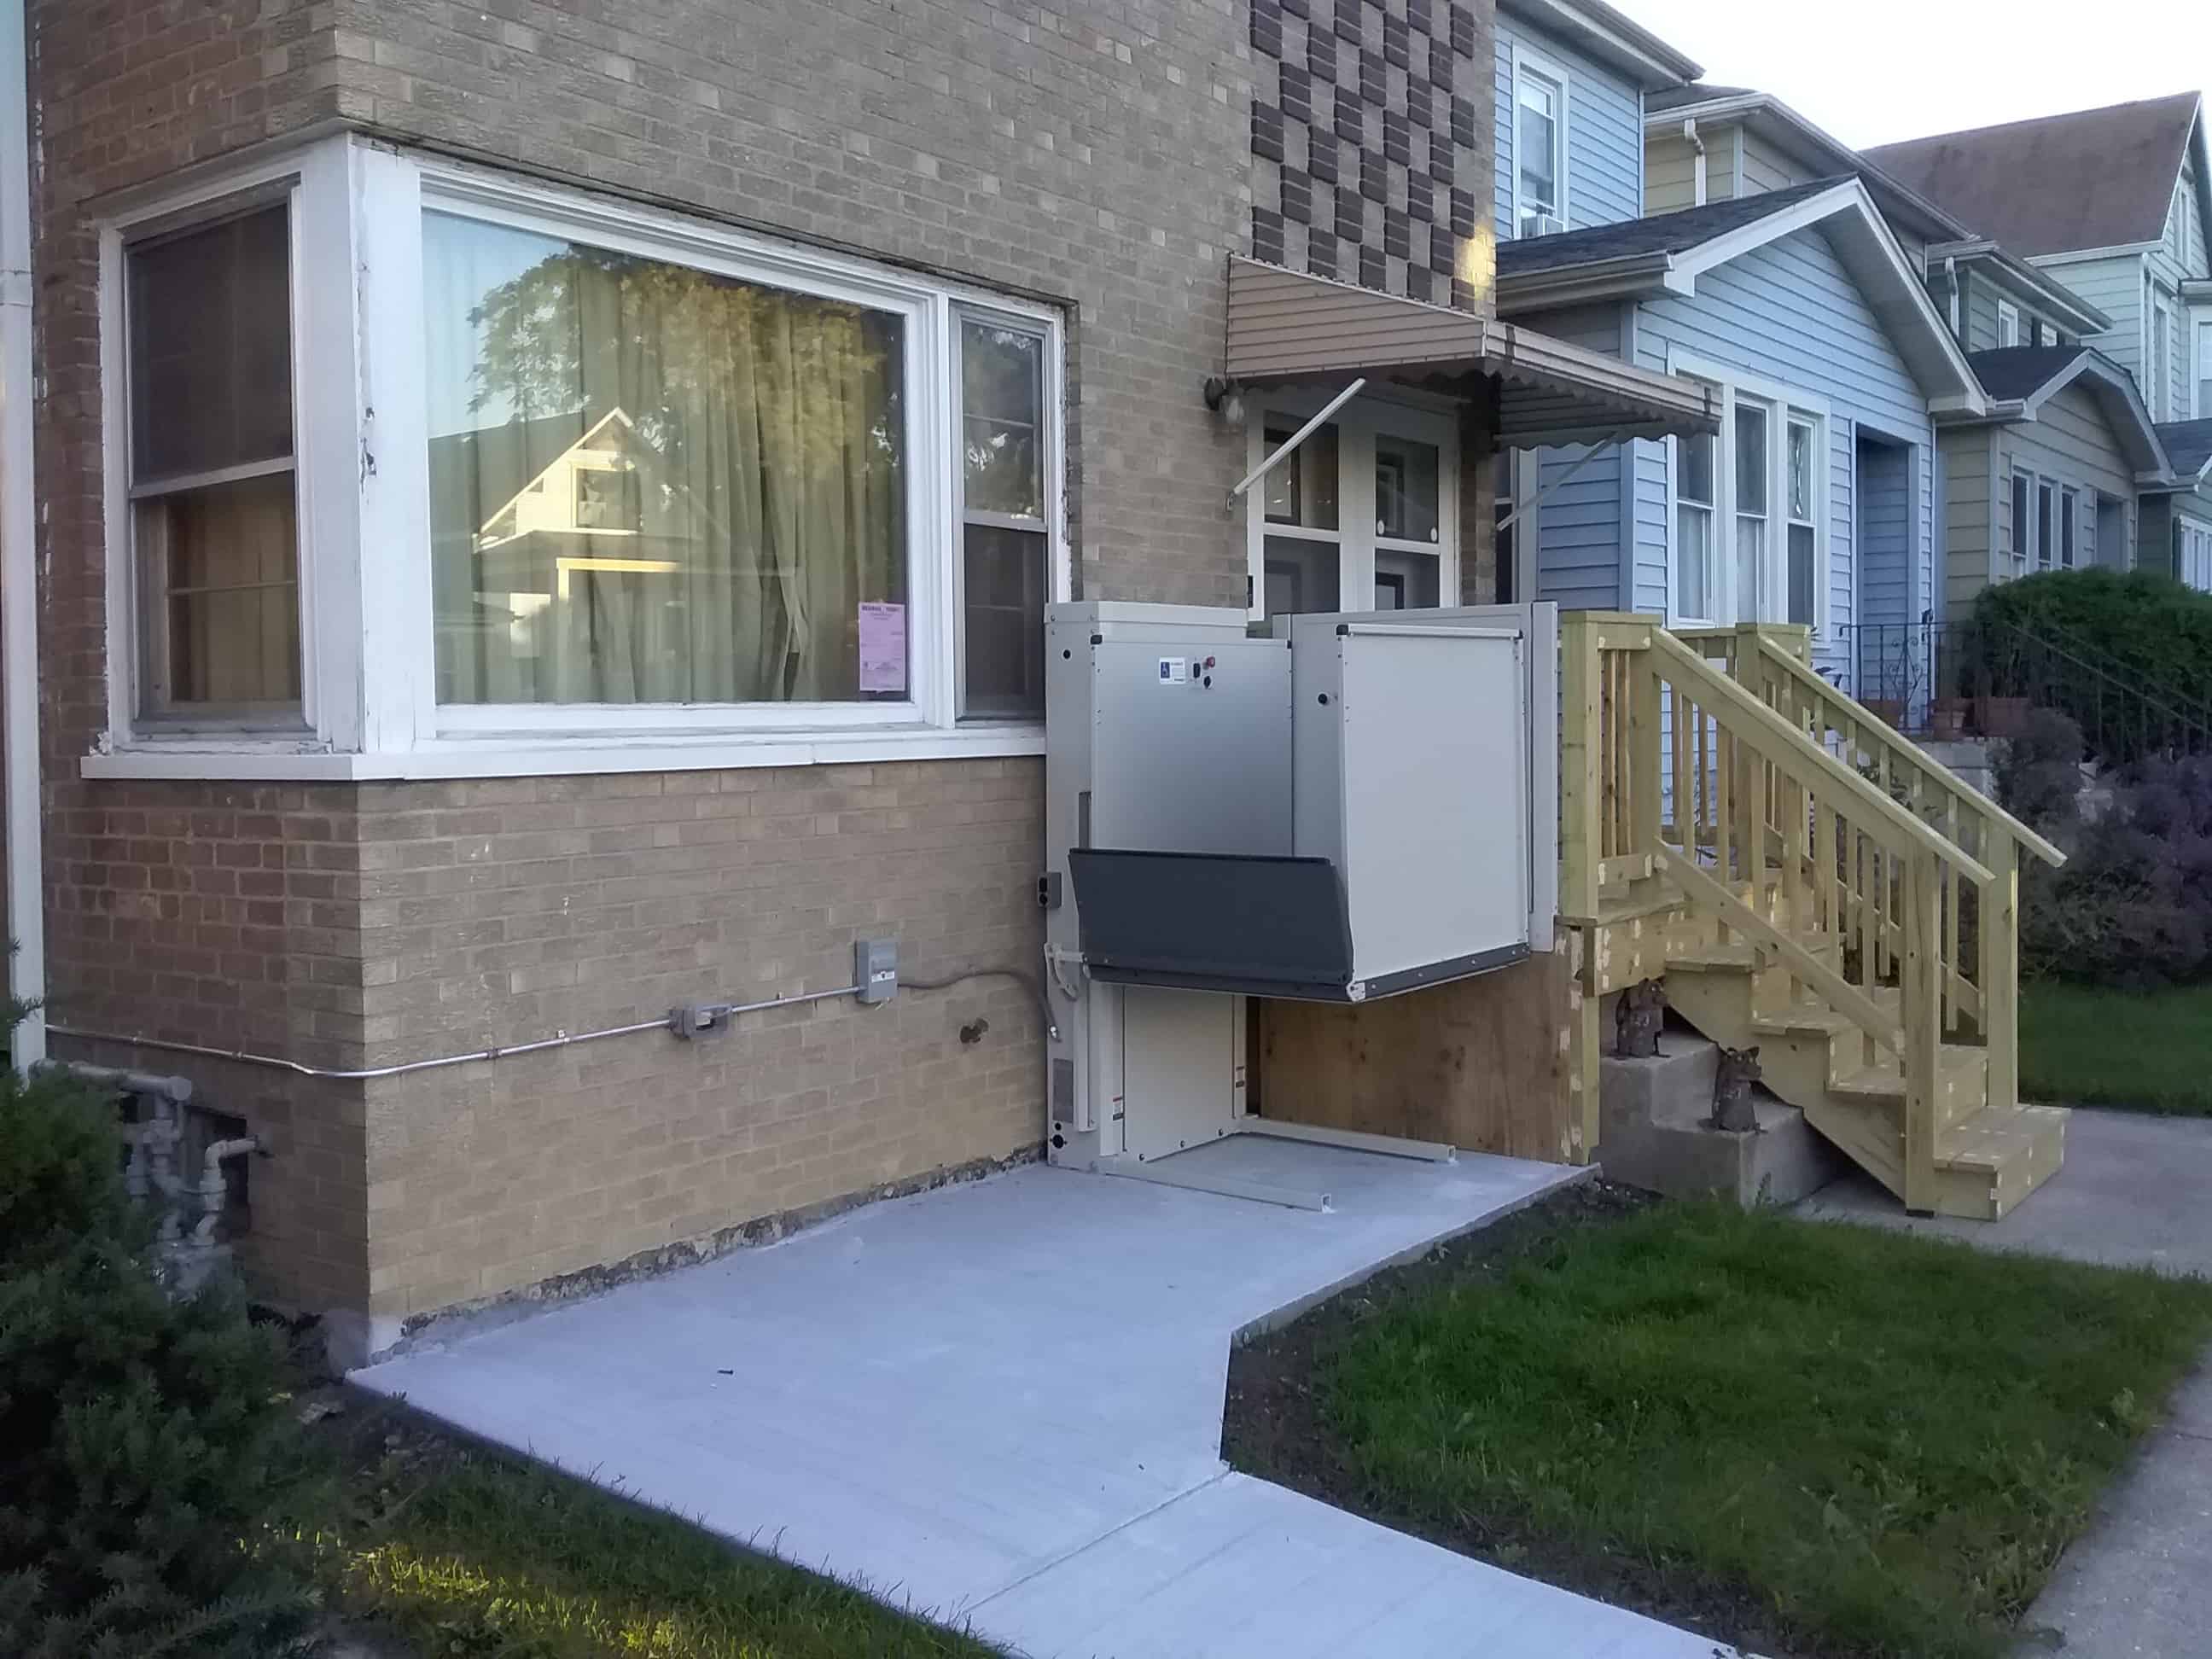 porch lift installed by Lifeway CHI in Berwyn, Illinois for safe home access